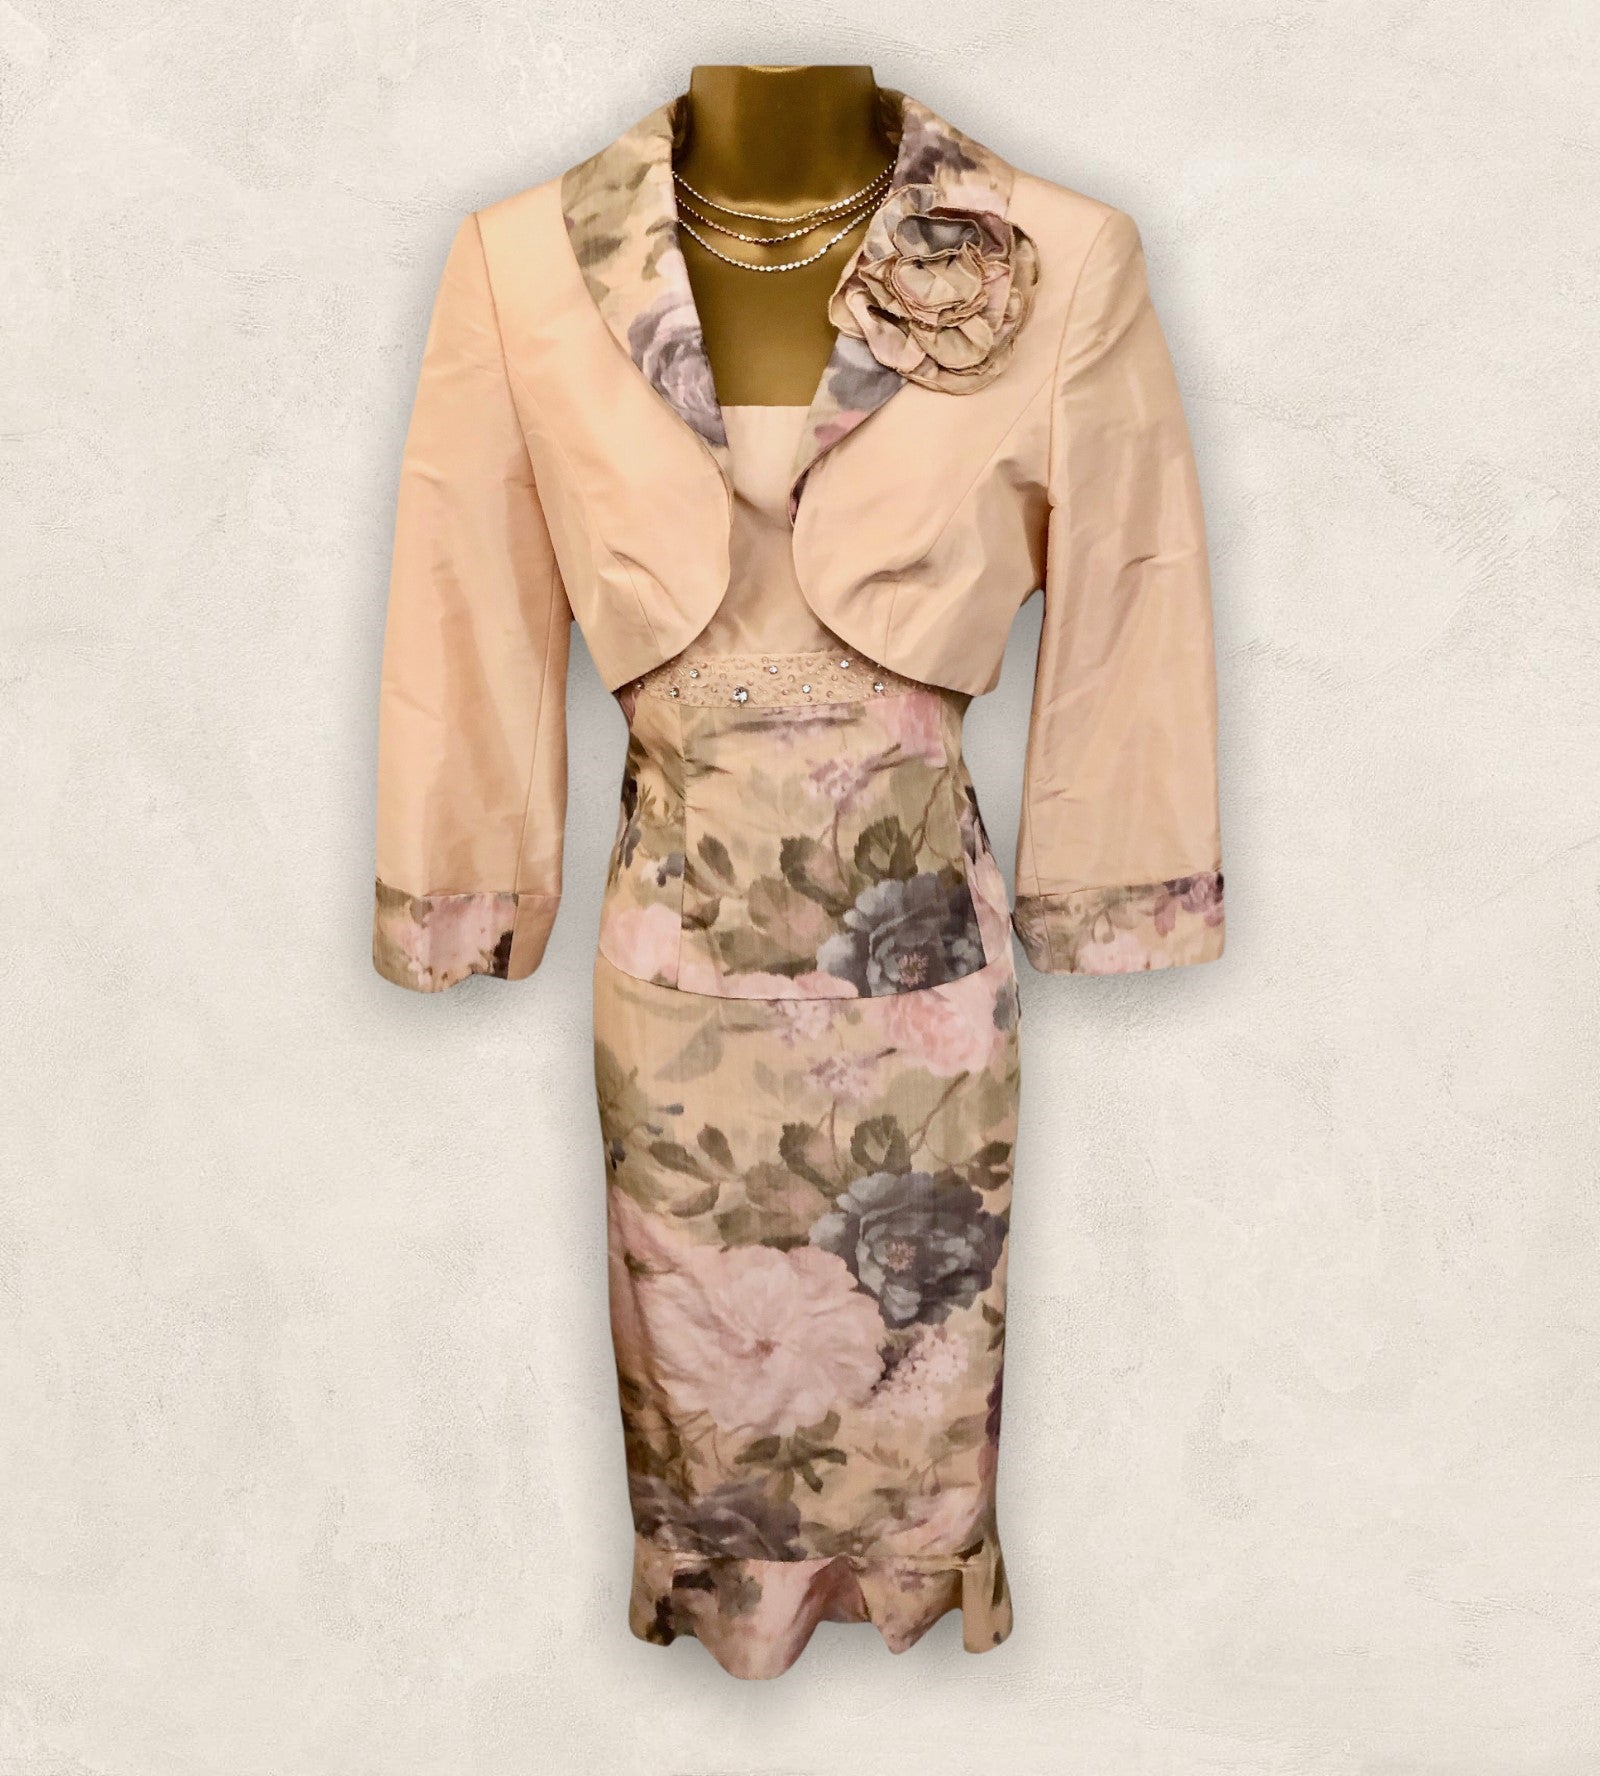 Frank Usher Peach Floral 3 Piece Special Occasion Outfit UK 12 US 8 EU 40 BNWT Timeless Fashions